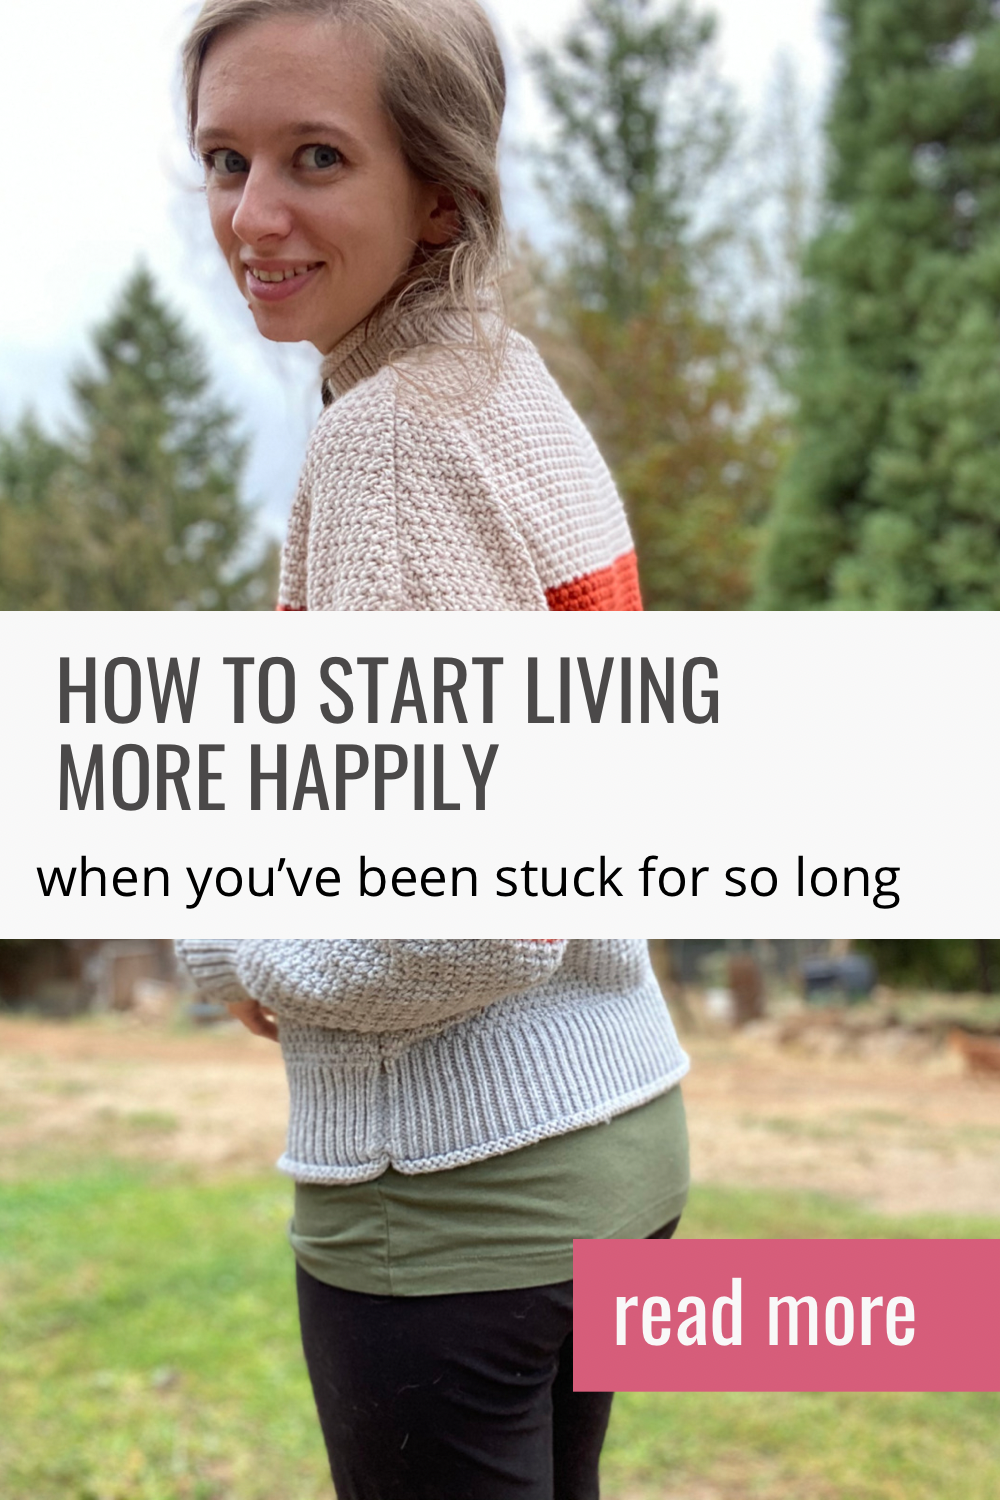 22: How to Start Being Happier (where to begin when you’ve been stuck in your unhealthy cycles for so long)